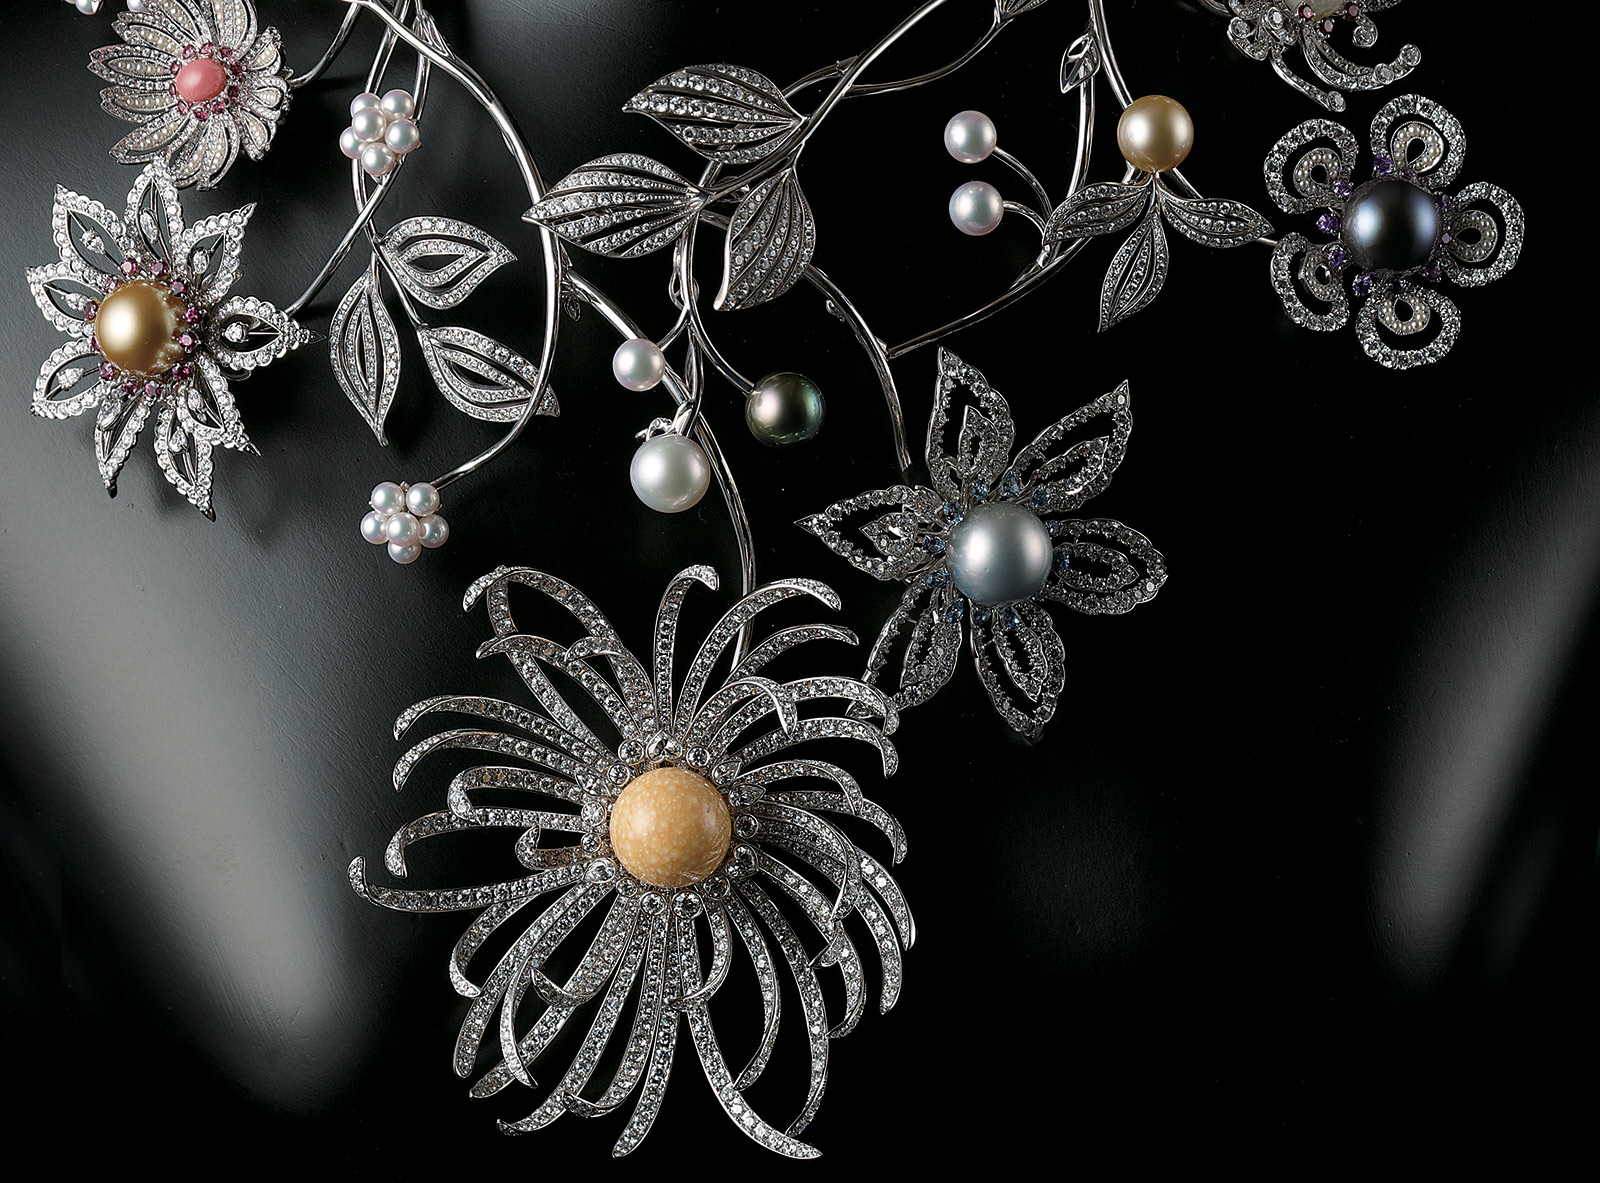 The Mikimoto Dreams & Pearls crown contains rare conch and melo pearls in 12 uniquely designed floral arrangements